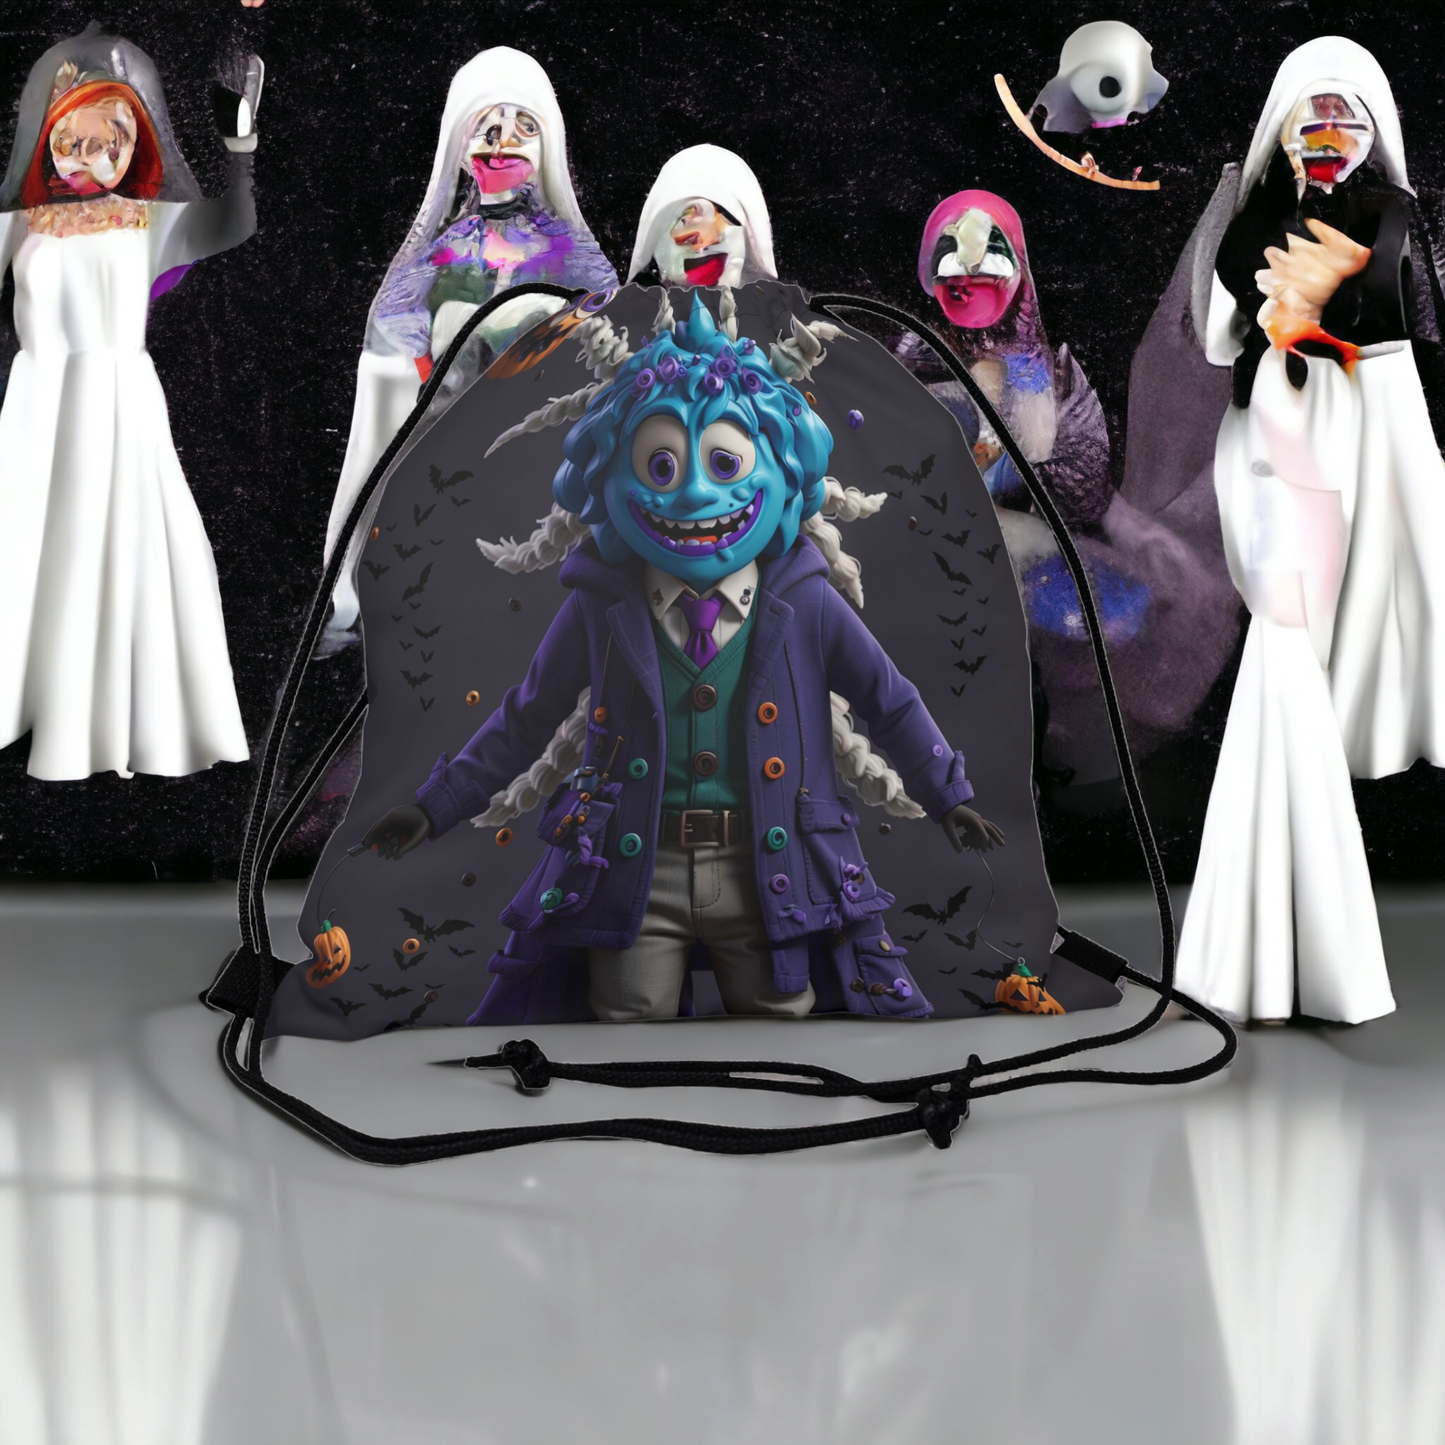 Ghoul's Night Out Drawstring Bag "A Spine-Chilling Companion for Halloween Adventures!" Bags Bigger Than Life 14” x 13”  